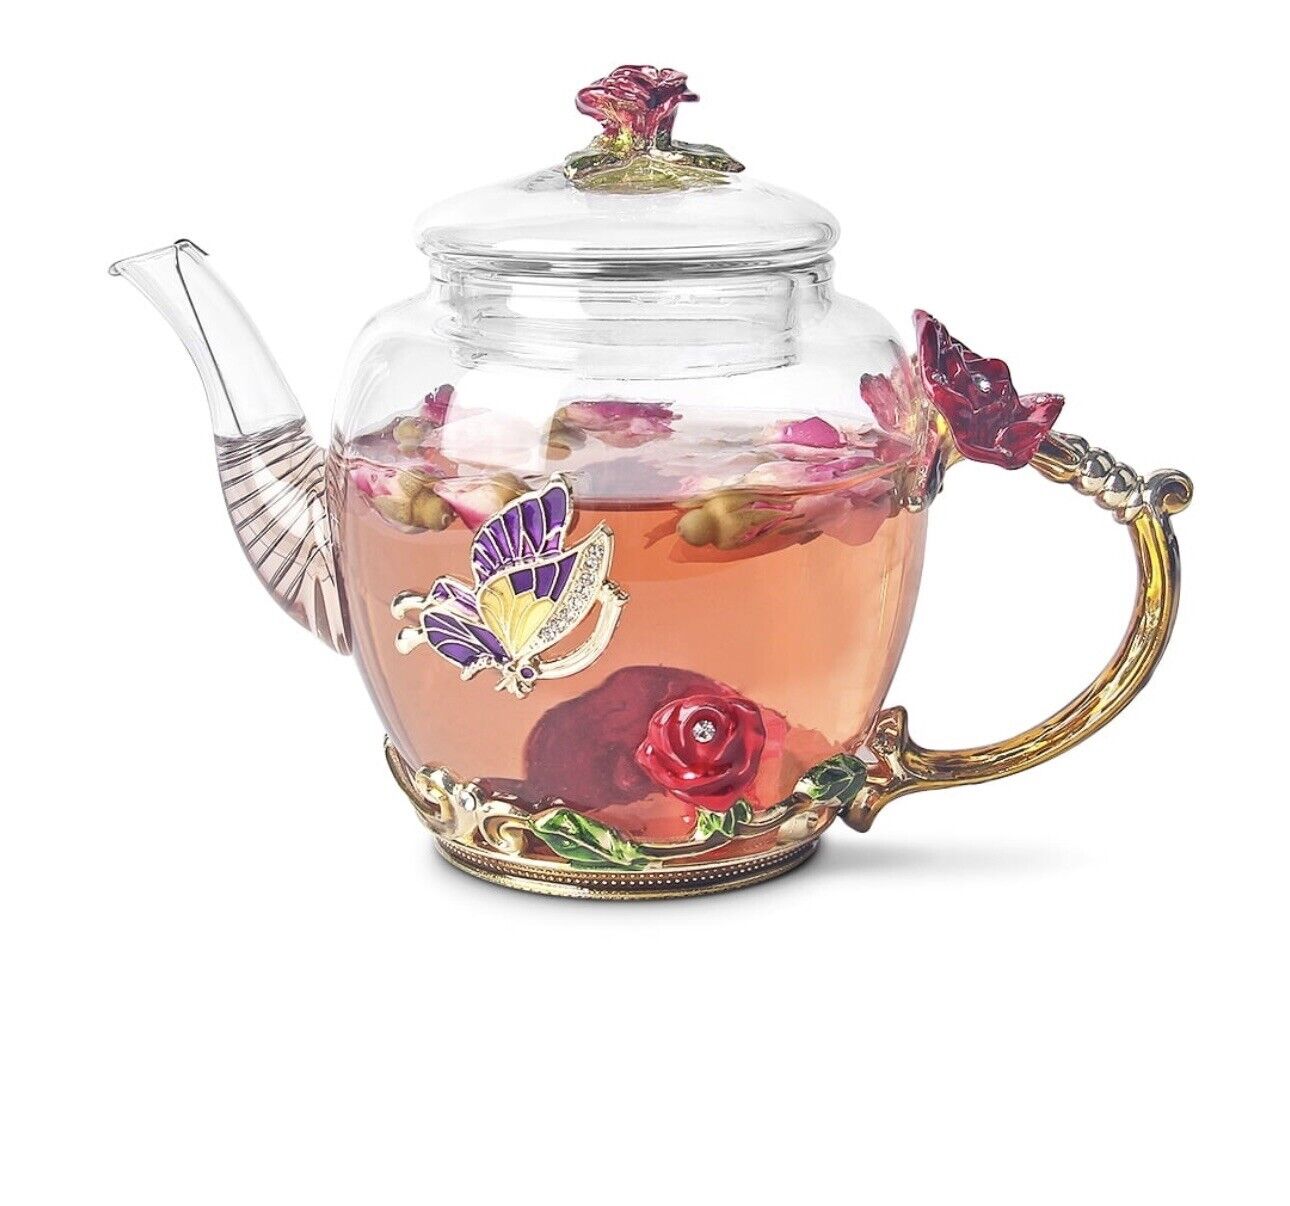 “LandHope Glass Teapot Set: 280ml with 6 Cups” Red